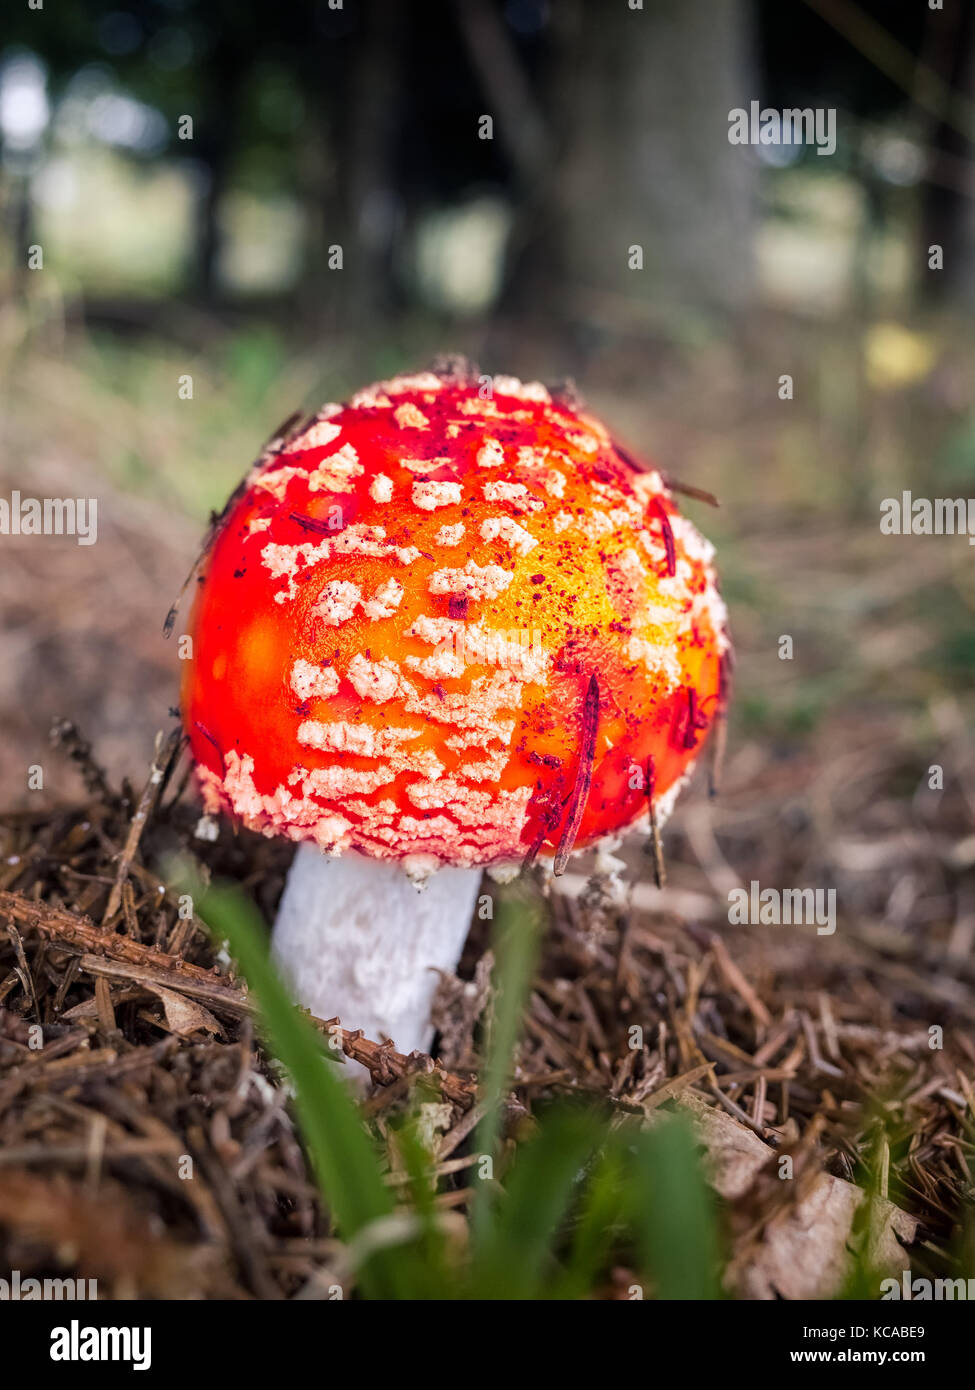 Close-up picture of a Amanita poisonous mushroom in nature, Valsassina, Italy Stock Photo